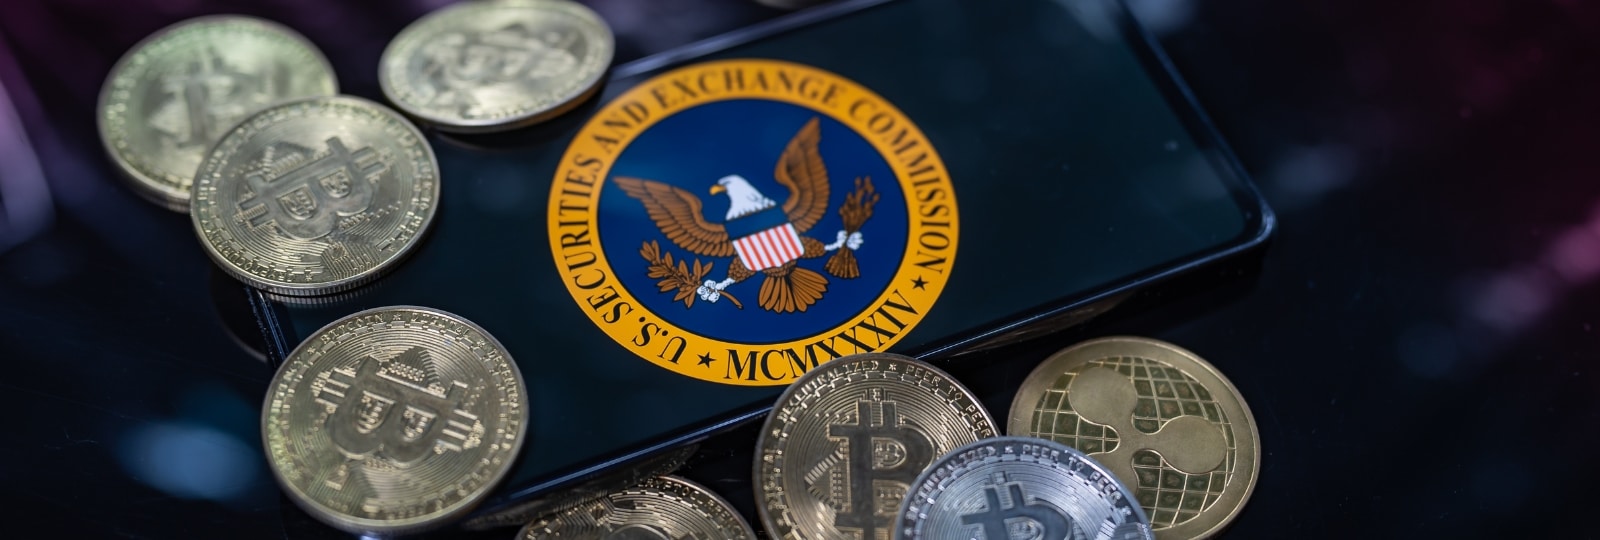 Consensys challenges SEC's 'Unlawful' Ethereum oversight